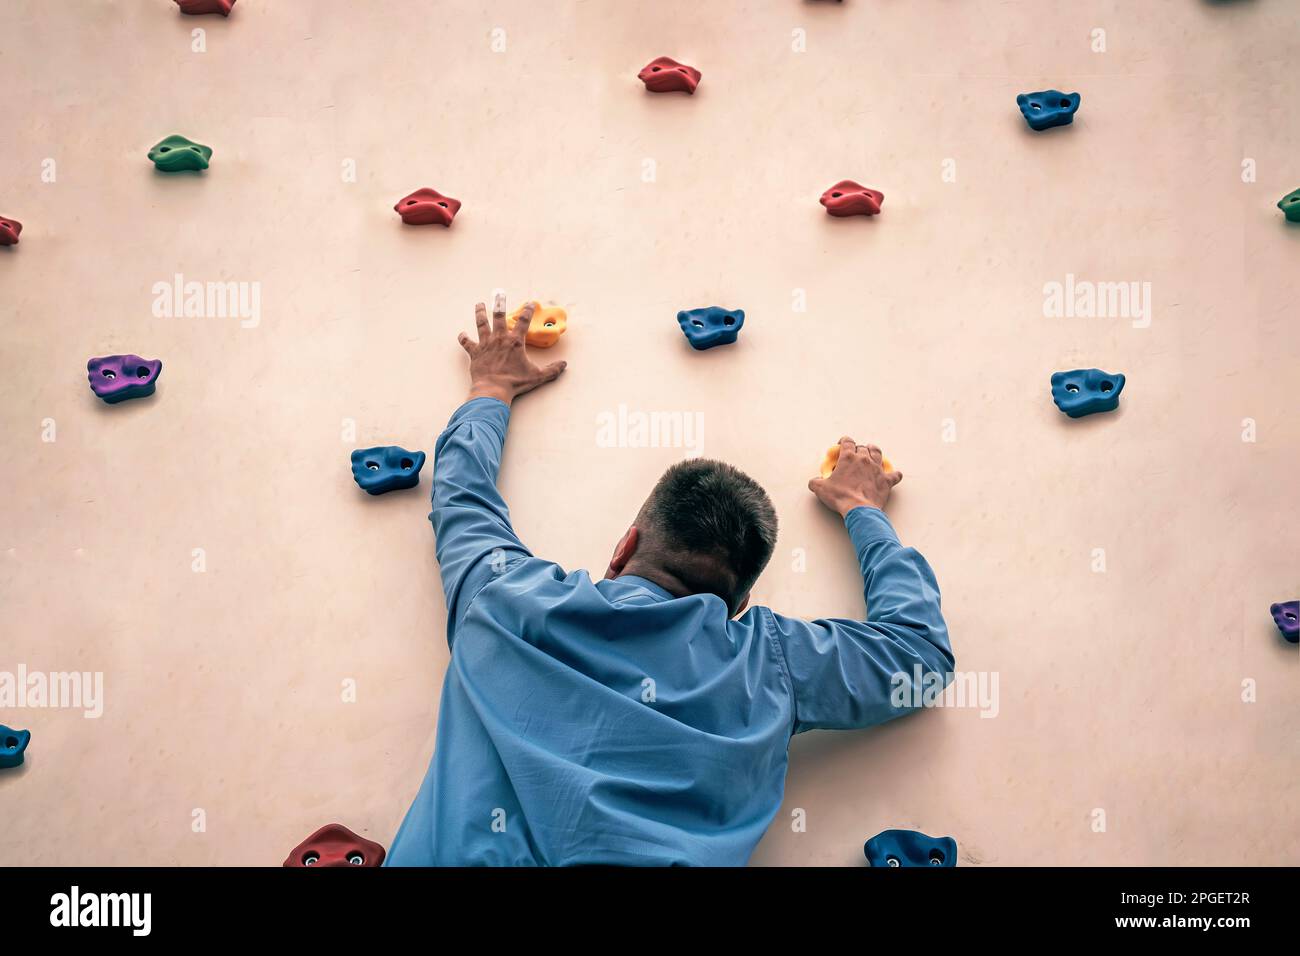 Businessman with cravat climbing a rock. Rock climbing as a hobby. an office worker trains in the gym. Extreme sports. Stock Photo